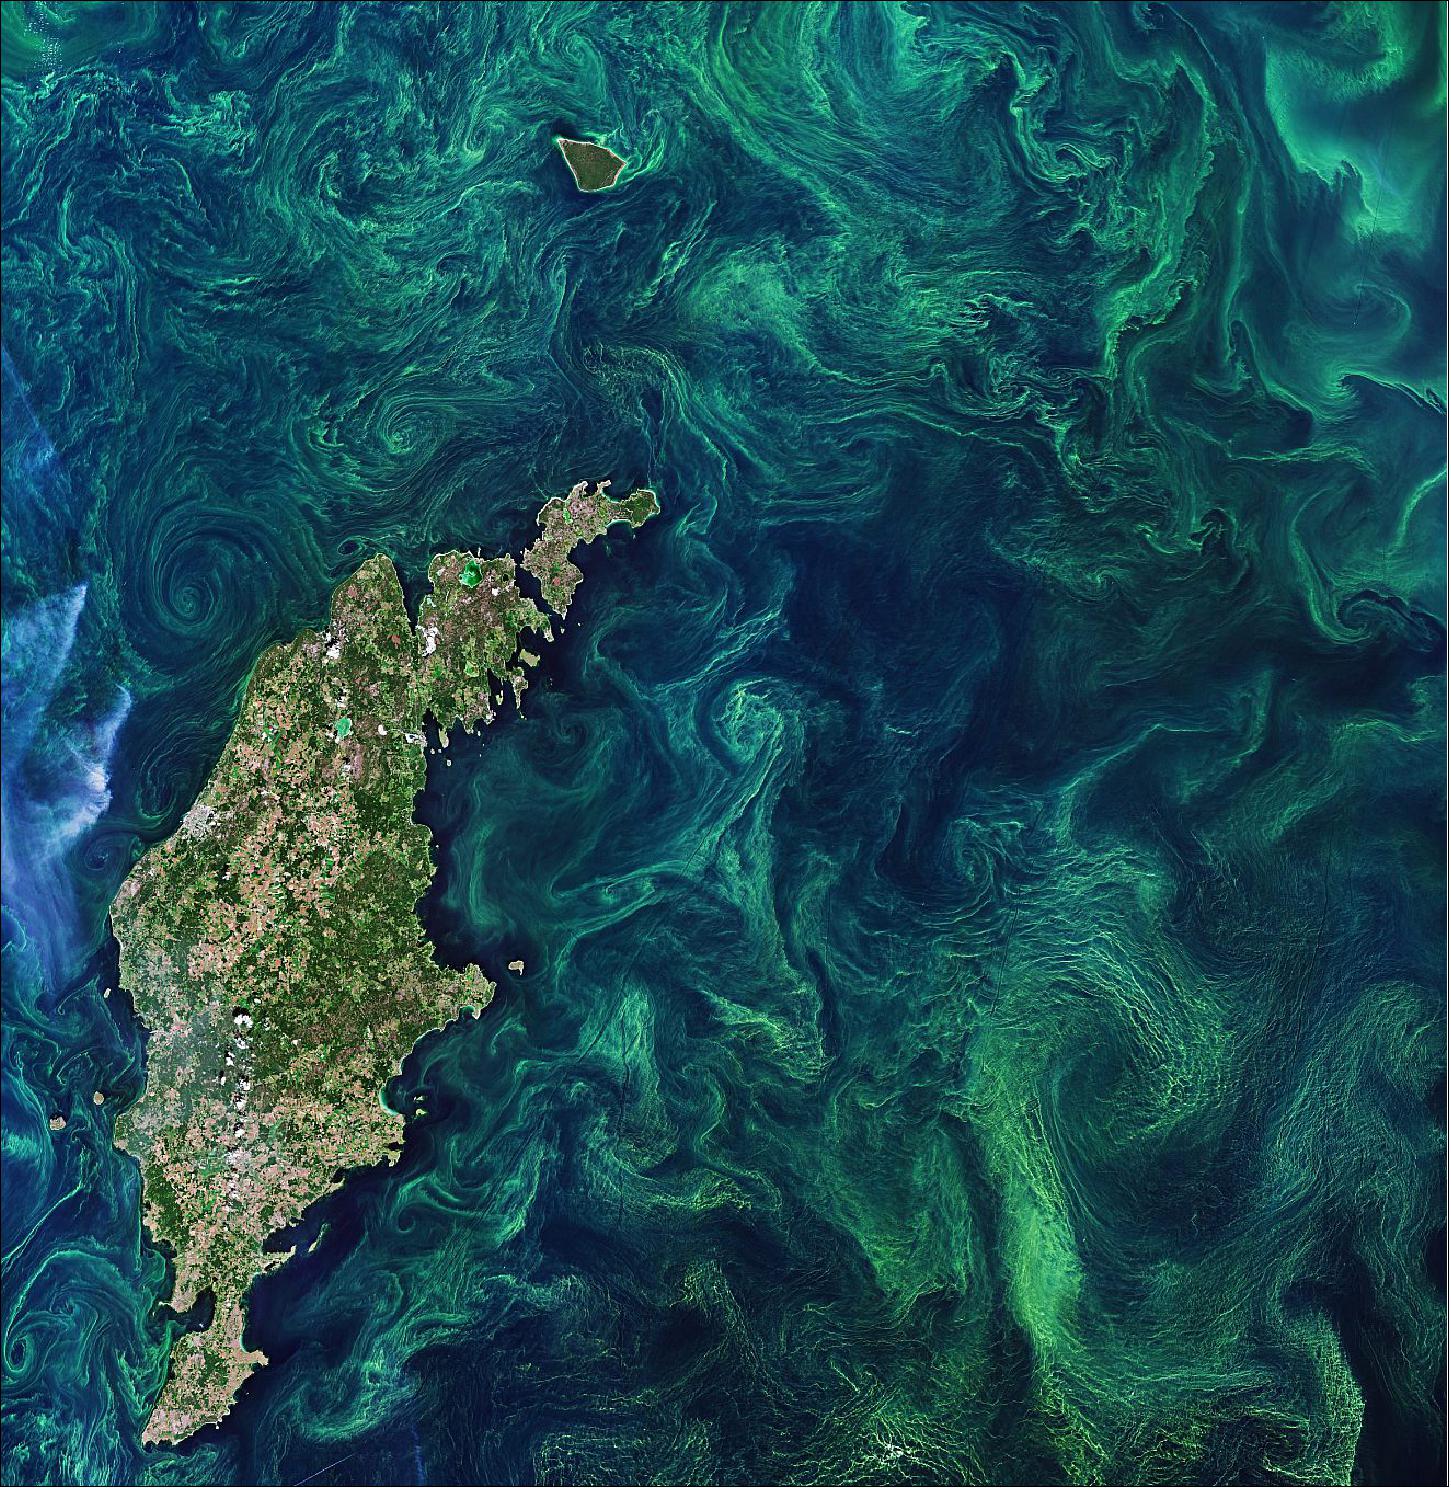 Figure 80: The Copernicus Sentinel-2 mission takes us over the green algae blooms swirling around the Baltic Sea. 'Algae bloom' is the term used to describe the rapid multiplying of phytoplankton – microscopic marine plants that drift on or near the surface of the sea. The chlorophyll that phytoplankton use for photosynthesis collectively tints the surrounding ocean waters, providing a way of detecting these tiny organisms from space. In most of the Baltic Sea, there are two annual blooms – the spring bloom and the cyanobacterial (also called blue-green algae) bloom in late summer. The Baltic Sea faces many serious challenges, including toxic pollutants, deep-water oxygen deficiencies, and toxic blooms of cyanobacteria affecting the ecosystem, aquaculture and tourism. Cyanobacteria have qualities similar to algae and thrive on phosphorus in the water. High water temperatures and sunny, calm weather often lead to particularly large blooms that pose problems to the ecosystem. - In this image captured on 20 July 2019, the streaks, eddies and whirls of the late summer blooms, mixed by winds and currents, are clearly visible. Without in situ measurements, it is difficult to distinguish the type of algae that covers the sea as many different types of algae grow in these waters. The highest concentrations of algal blooms are said to occur in the Central Baltic and around the island of Gotland, visible to the left in the image (image credit: ESA, the image contains modified Copernicus Sentinel data (2019), processed by ESA, CC BY-SA 3.0 IGO)